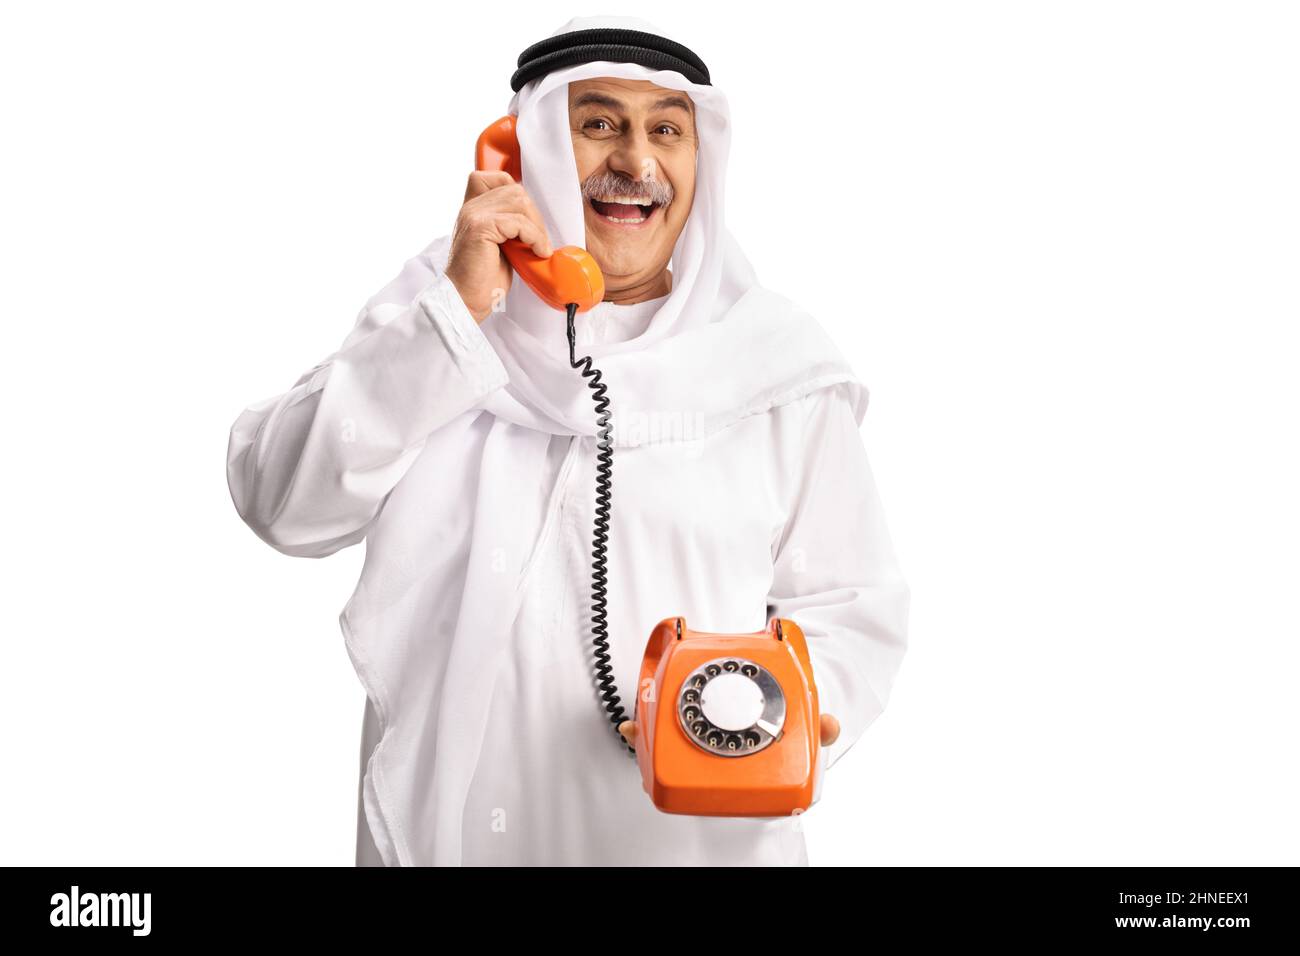 Arab man using an old vintage rotary phone and smiling isolated on white background Stock Photo